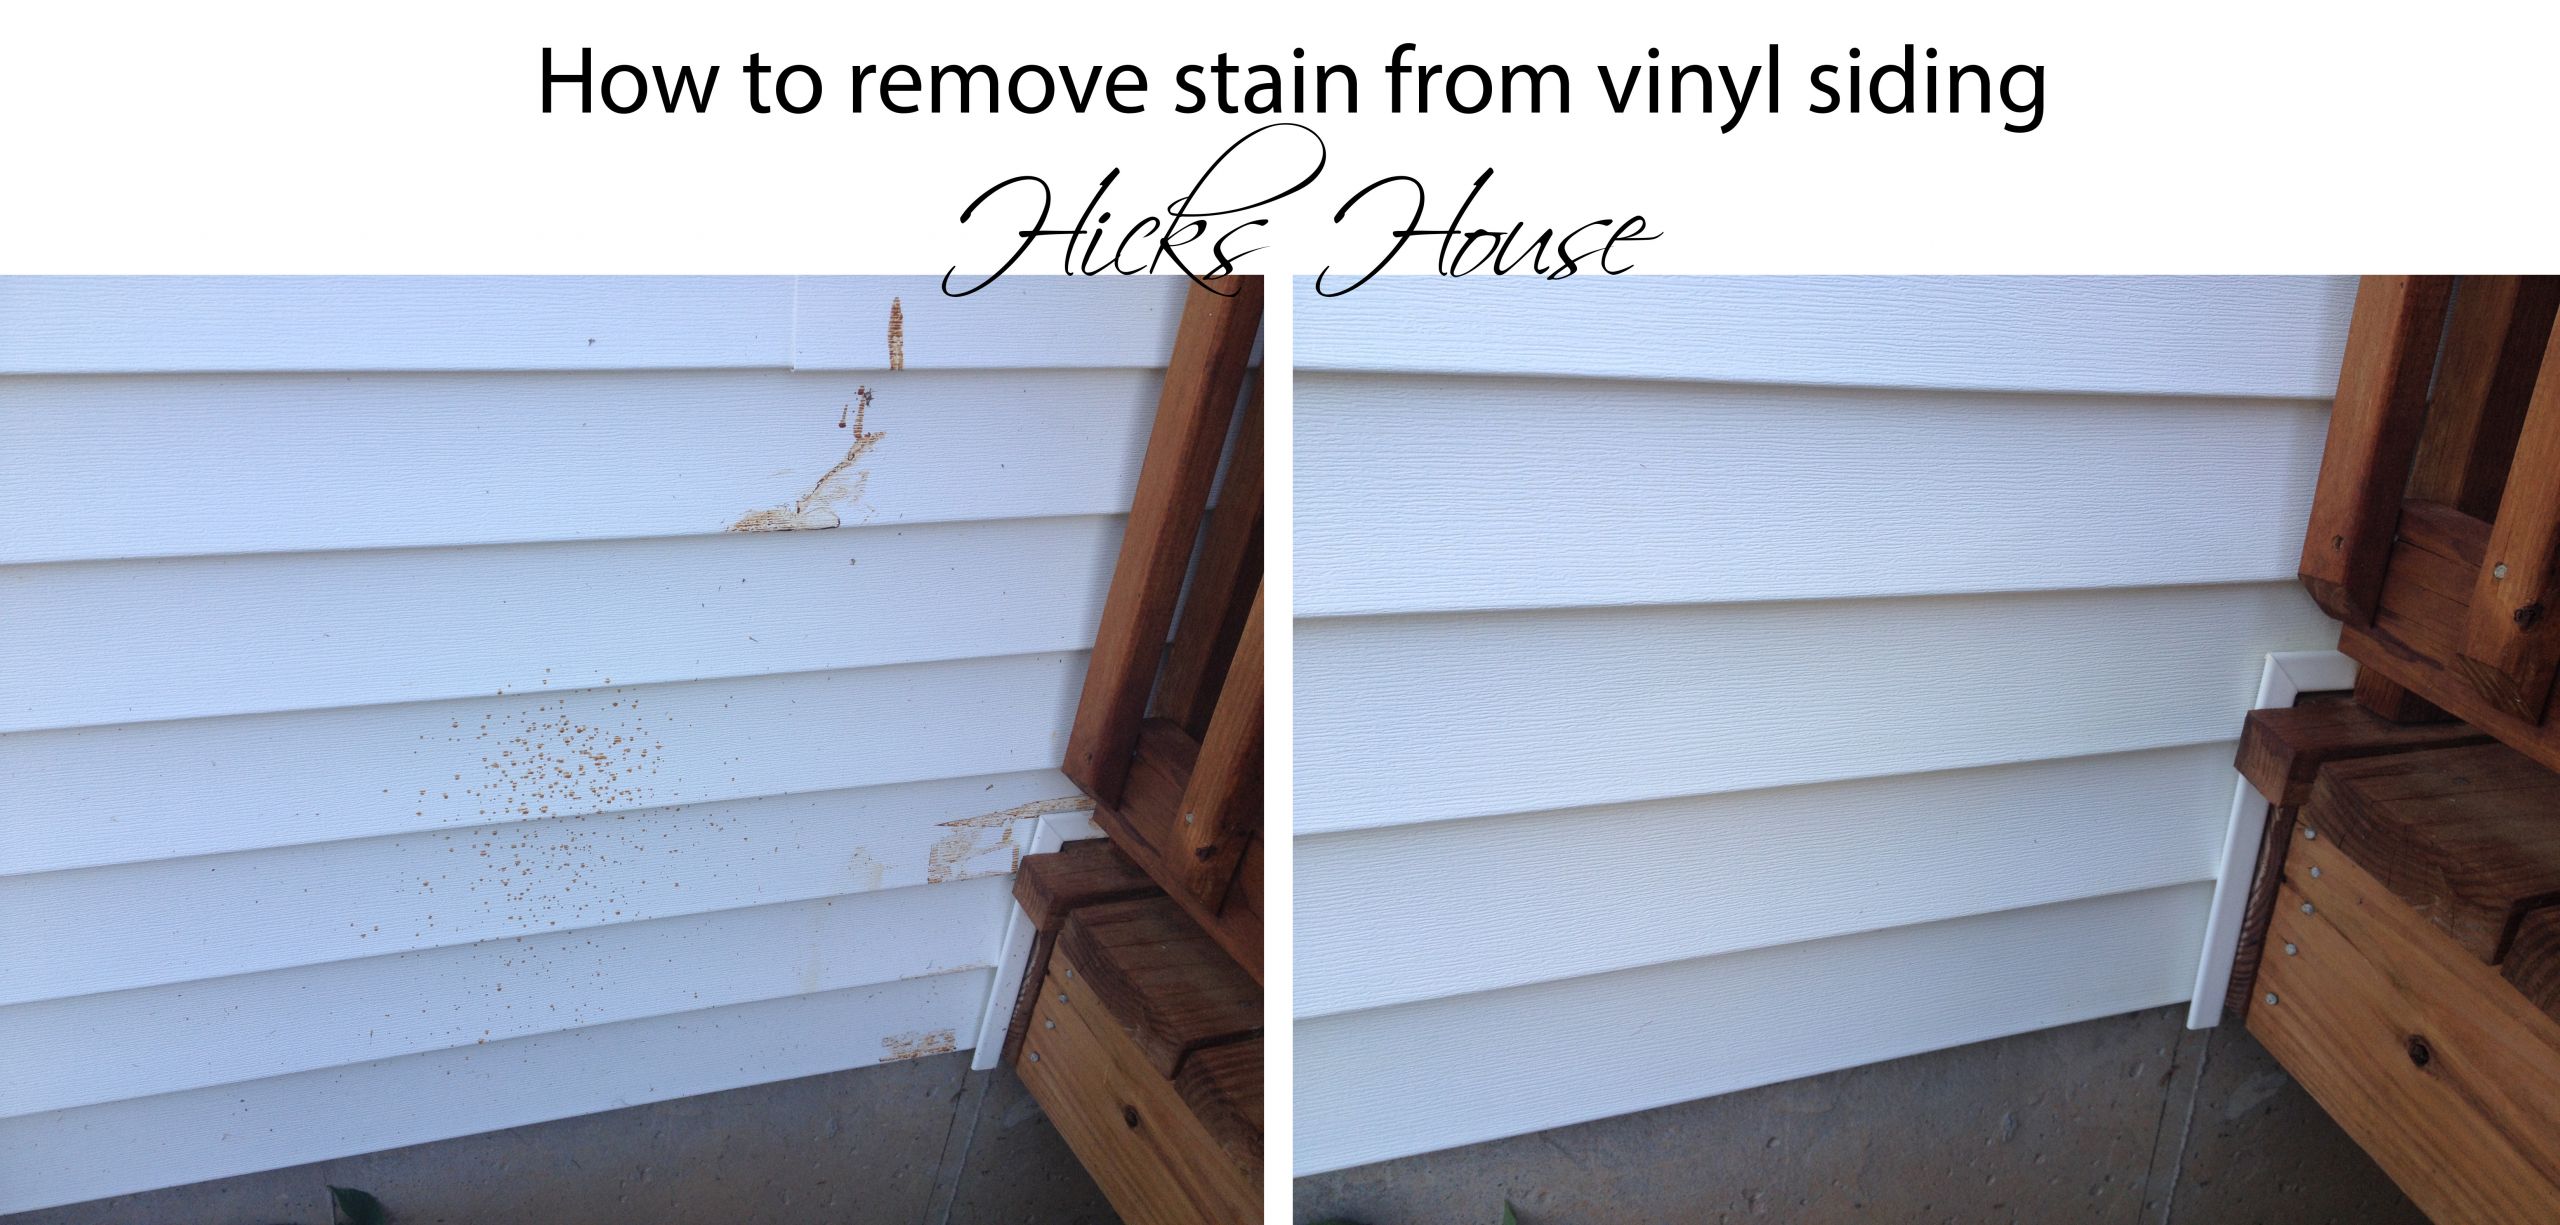 Remove Paint From Wood Deck
 how to remove stain from vinyl siding